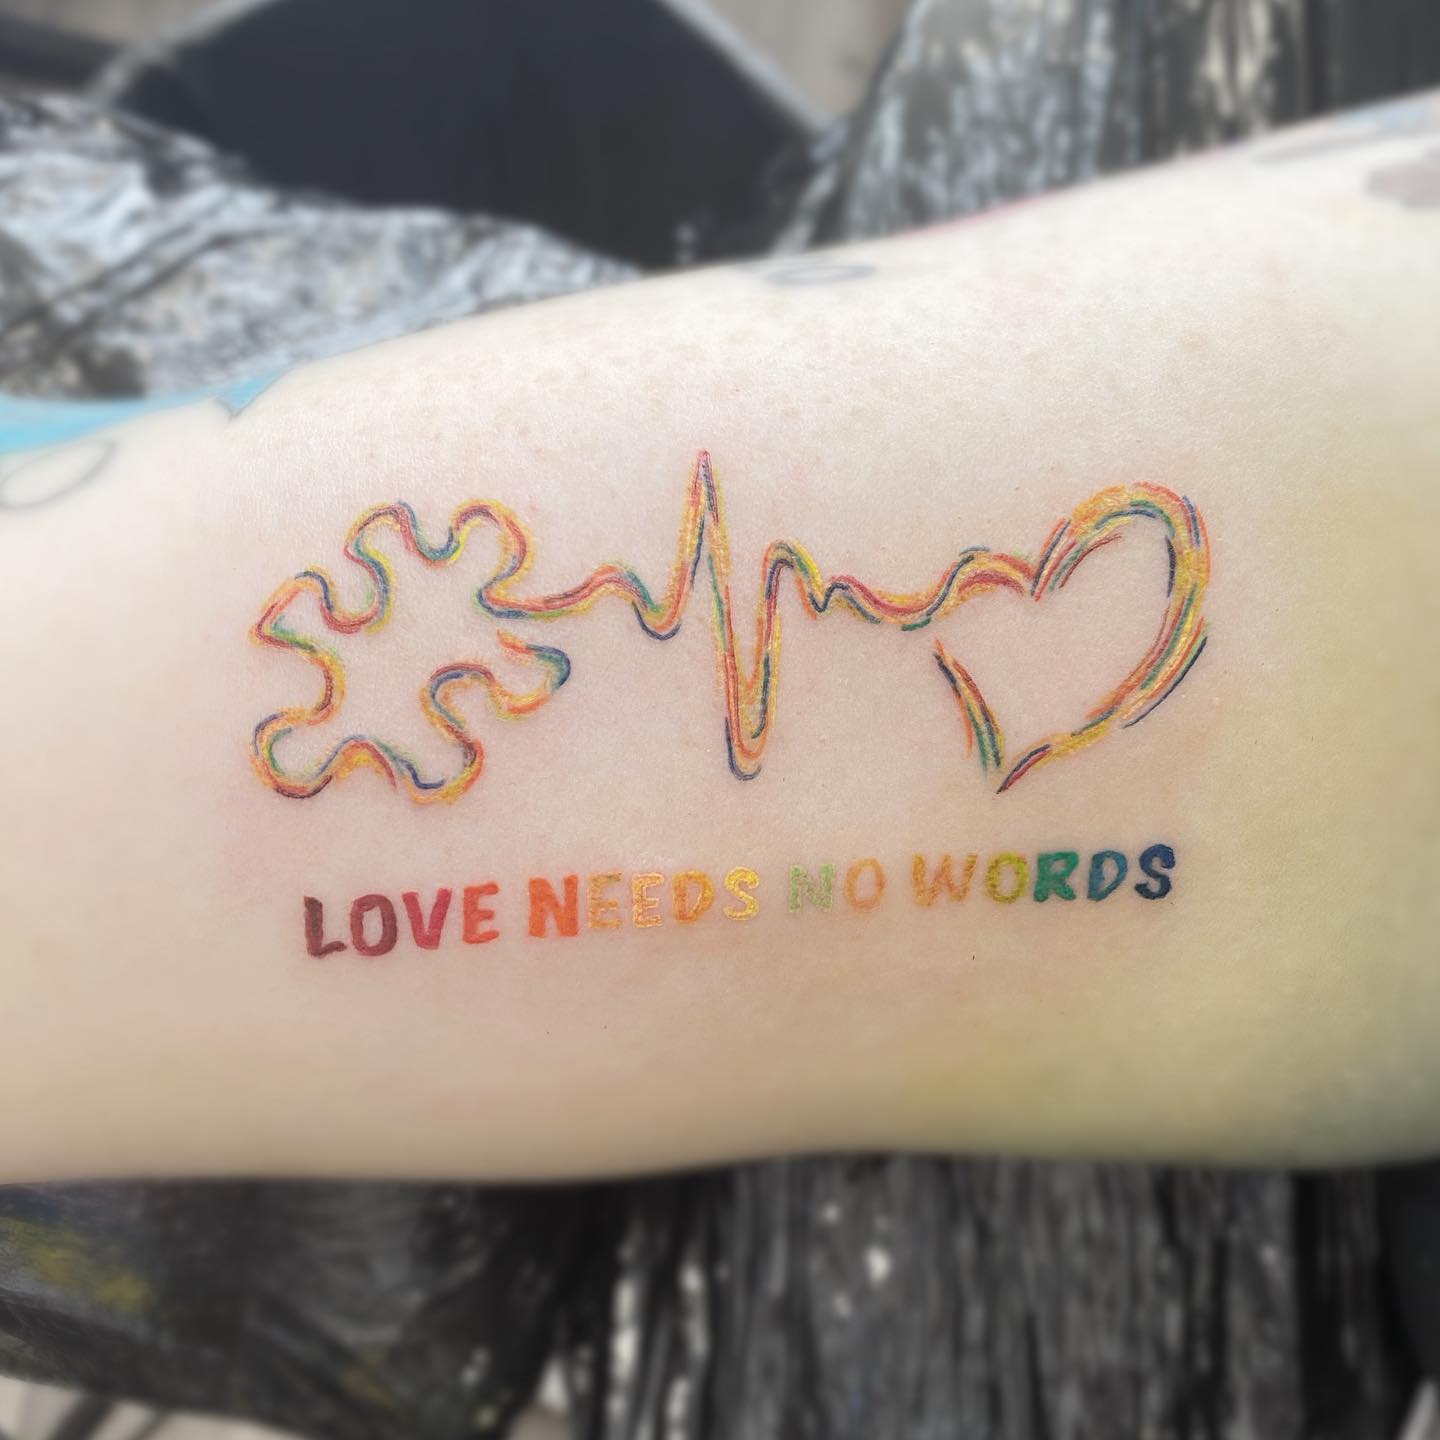 Let the world know that love needs no words. It is a gorgeous tattoo for those who truly believe in closeness.